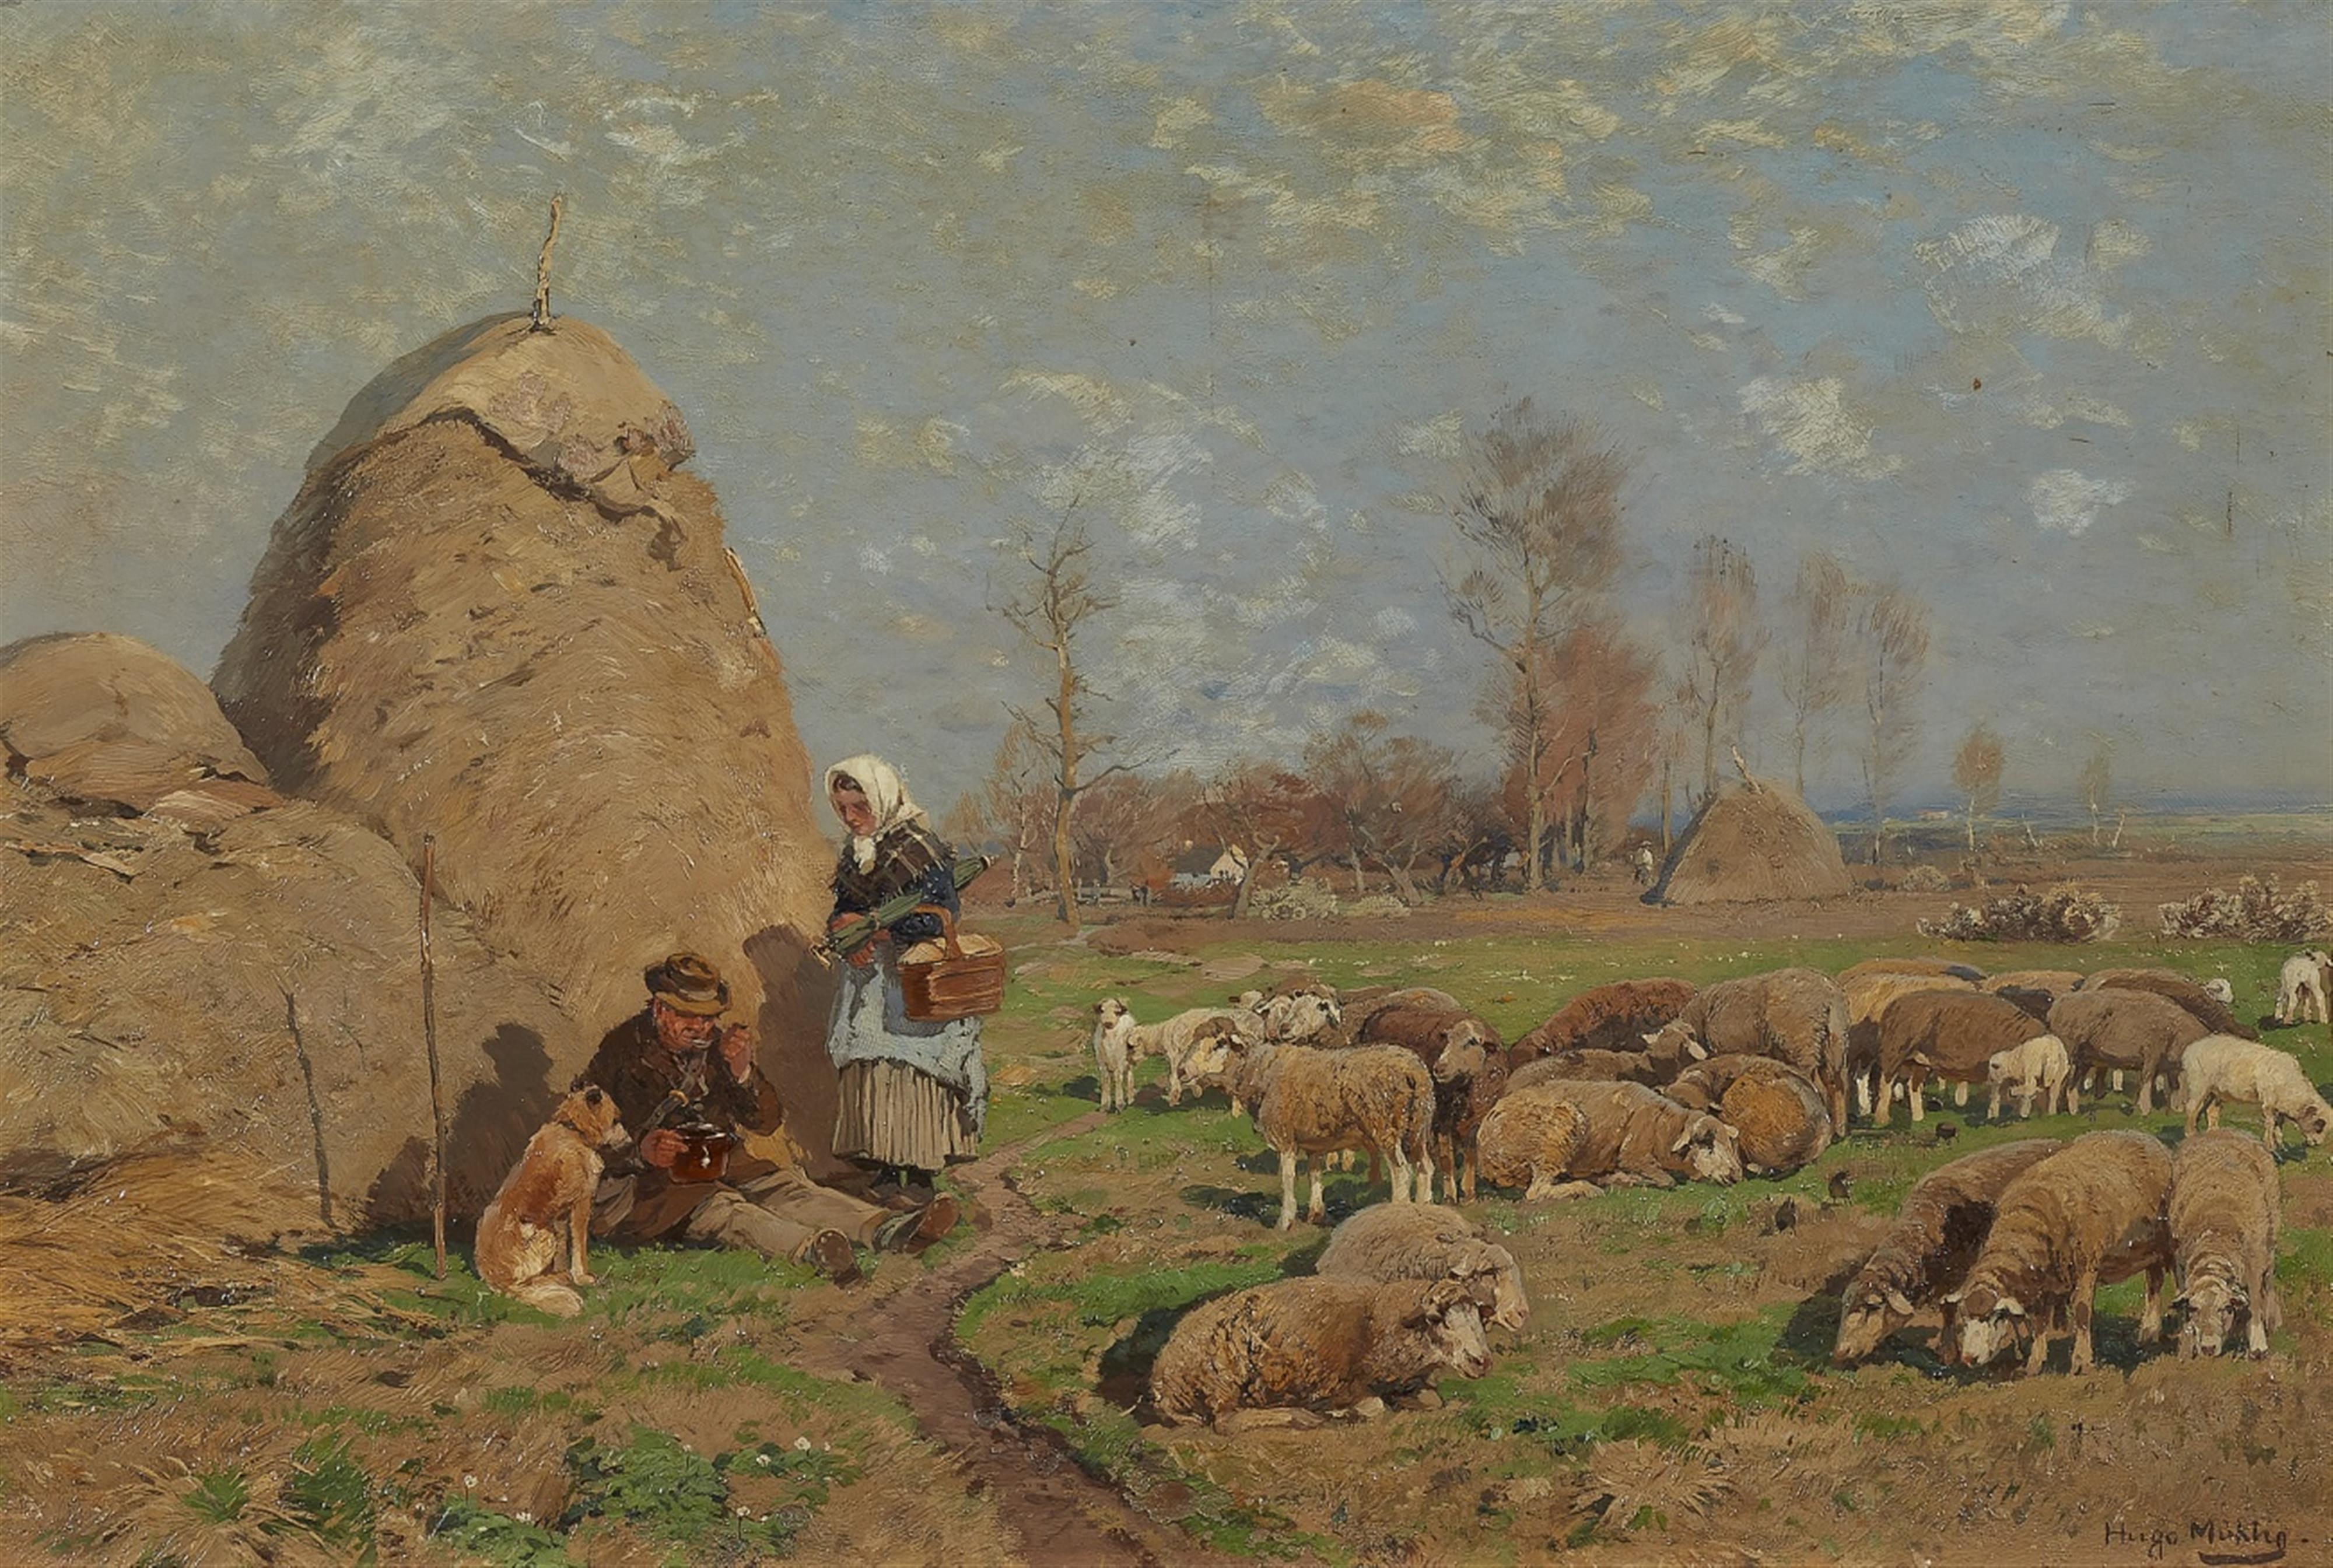 Hugo Mühlig - Summer Landscape with a Peasant Couple and a Herd of Sheep - image-1